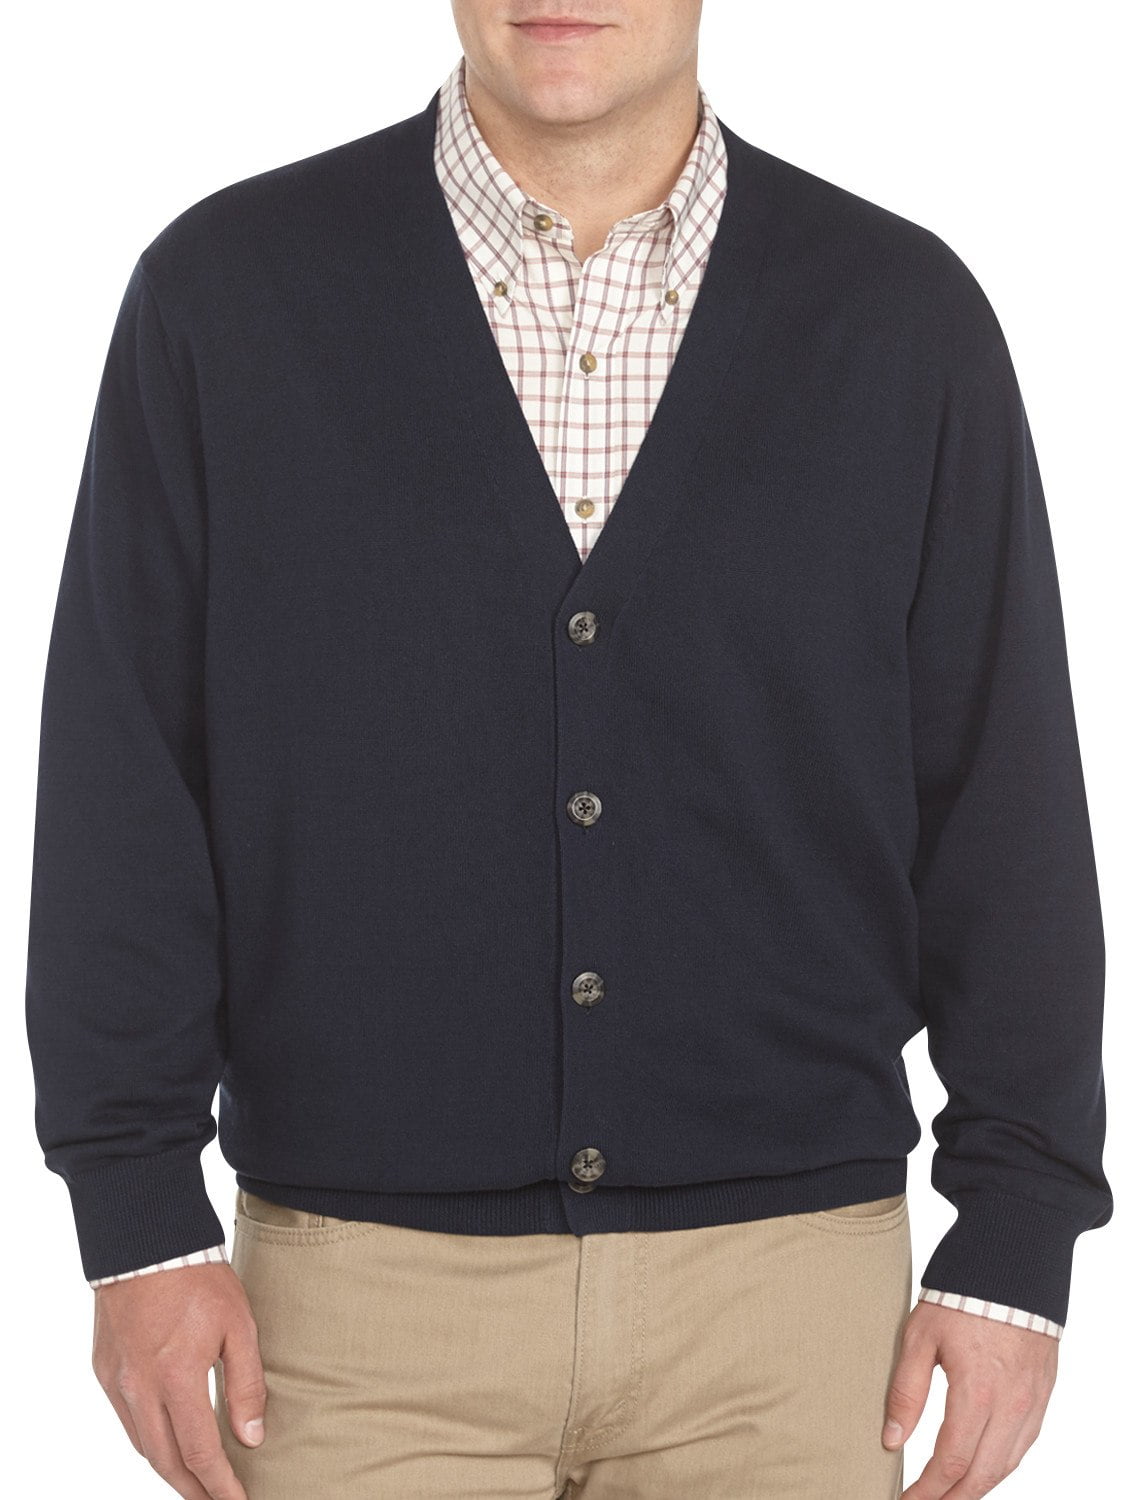 Harbor Bay by DXL Big and Tall Men's V-Neck Cardigan Sweater, Midnight ...